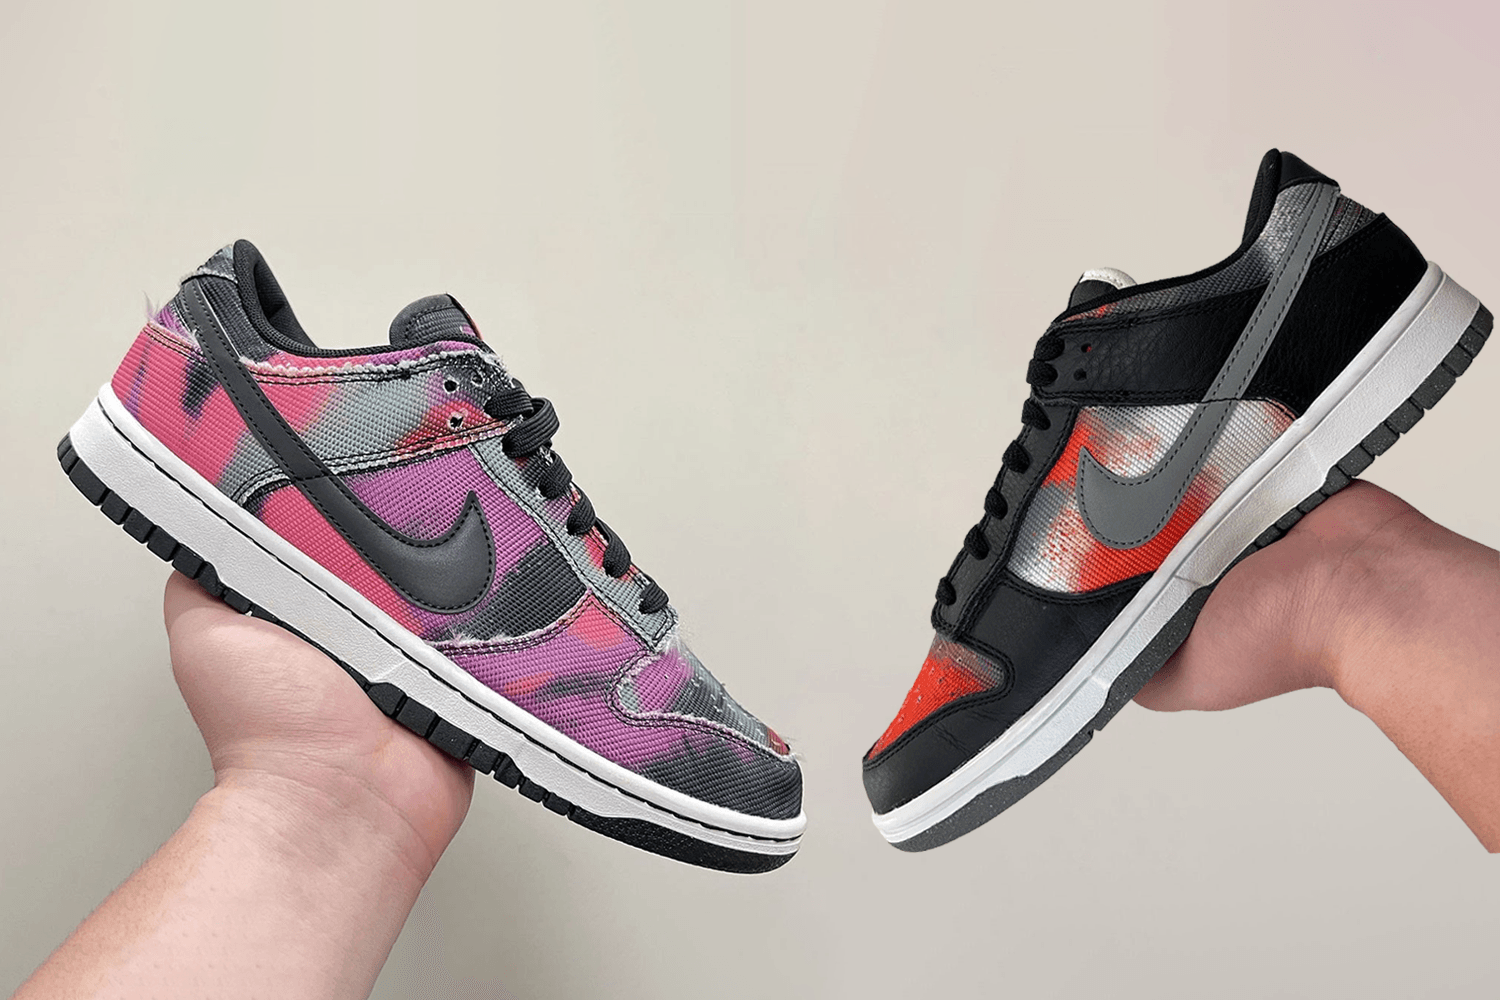 The upcoming Nike Dunk Low 'Graffiti' Pack in detail